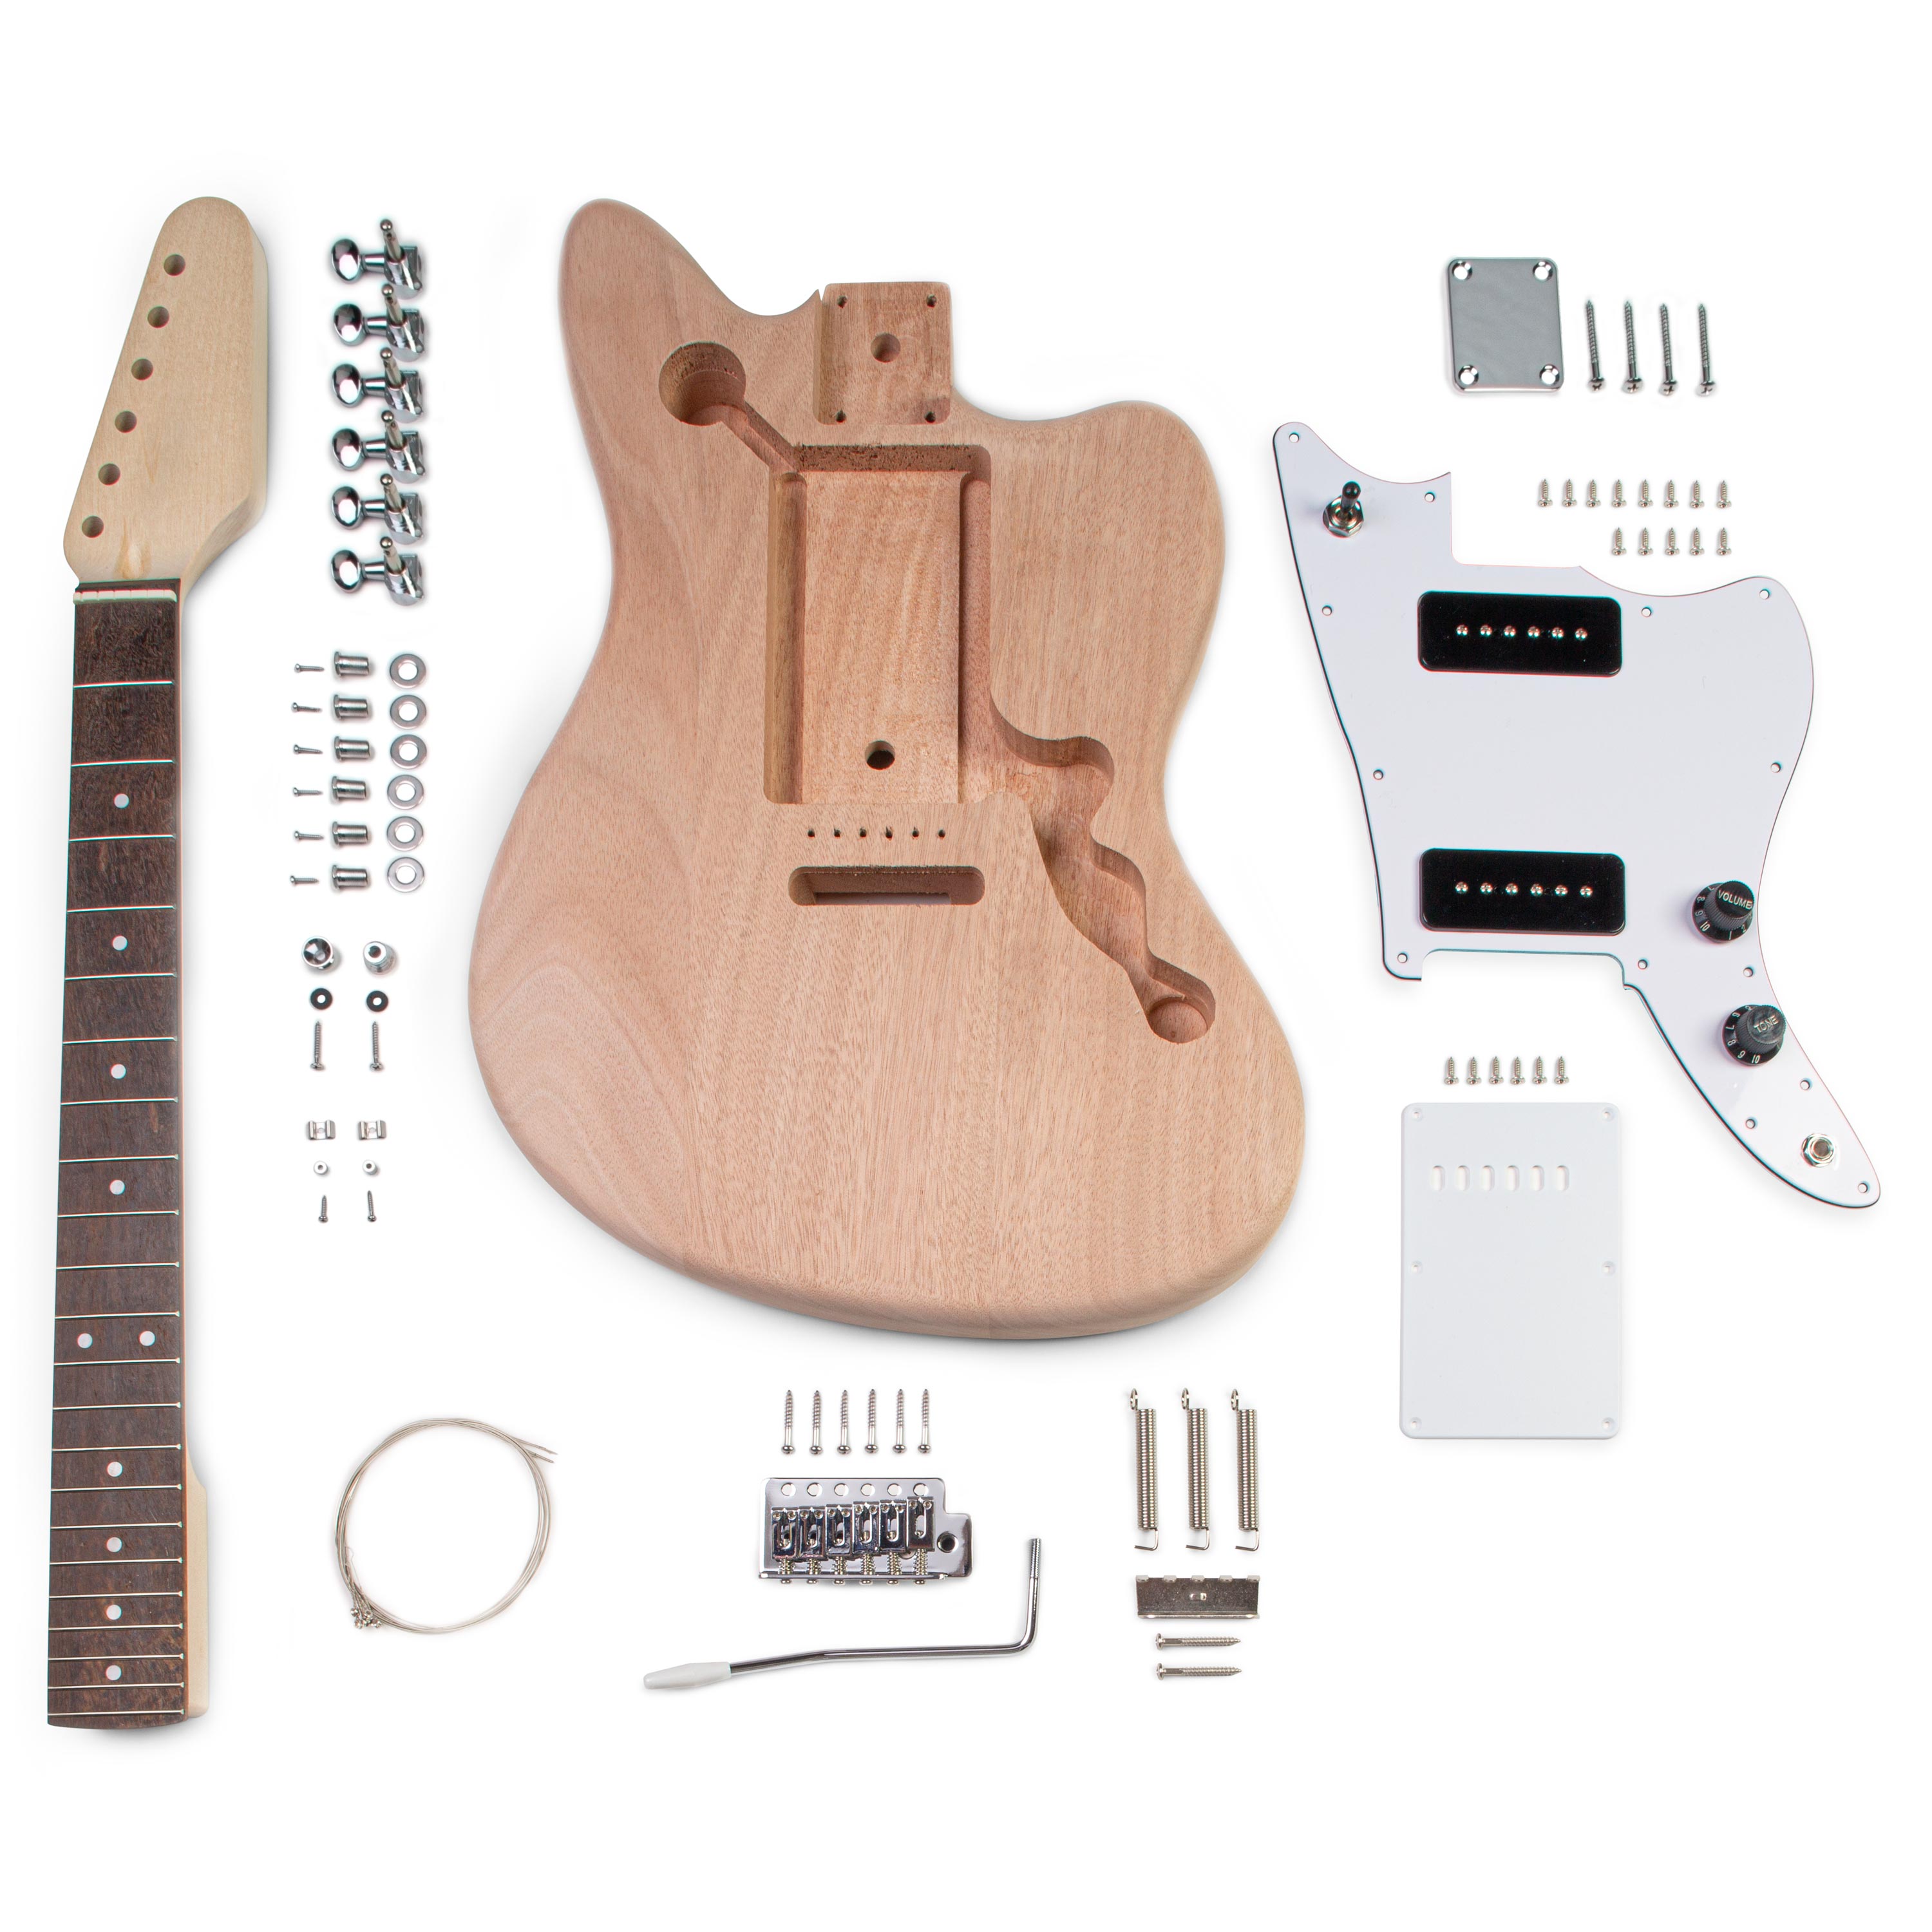 High Quality Guitar Kit - Offset Trem Electric Guitar Kit from StewMac.